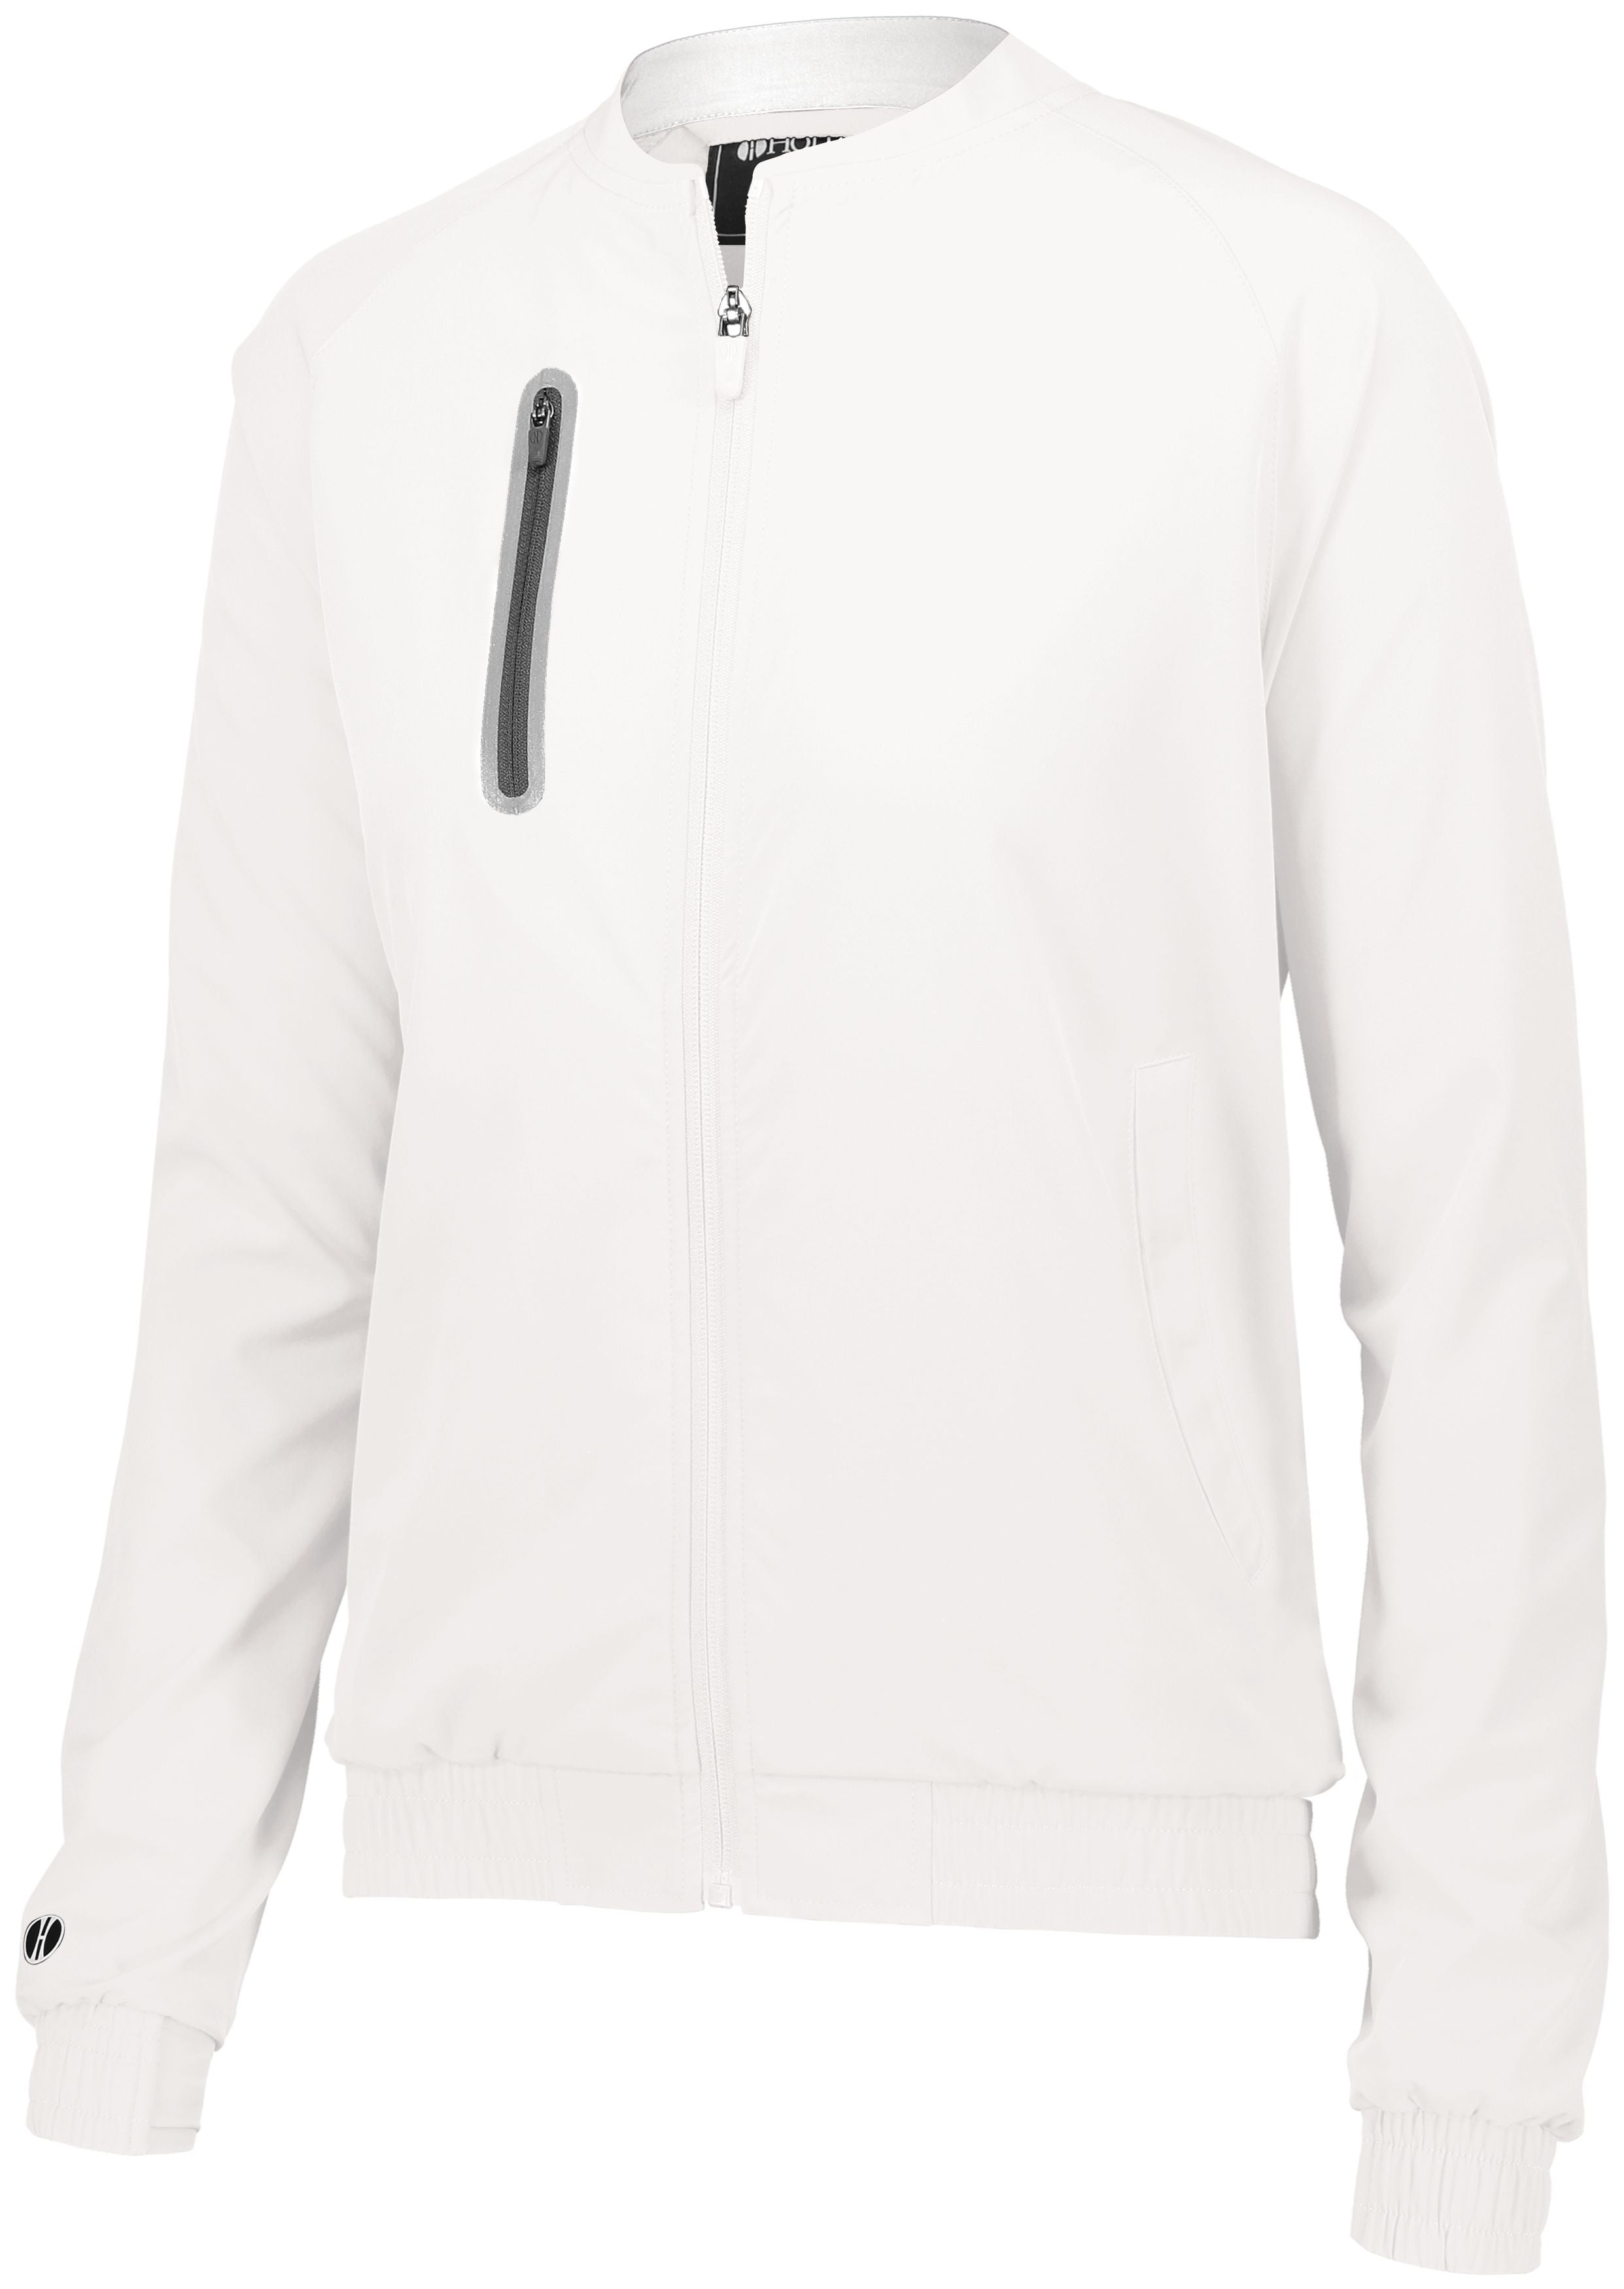 Holloway Ladies Weld Jacket in White  -Part of the Ladies, Ladies-Jacket, Holloway, Outerwear, Weld-Collection product lines at KanaleyCreations.com